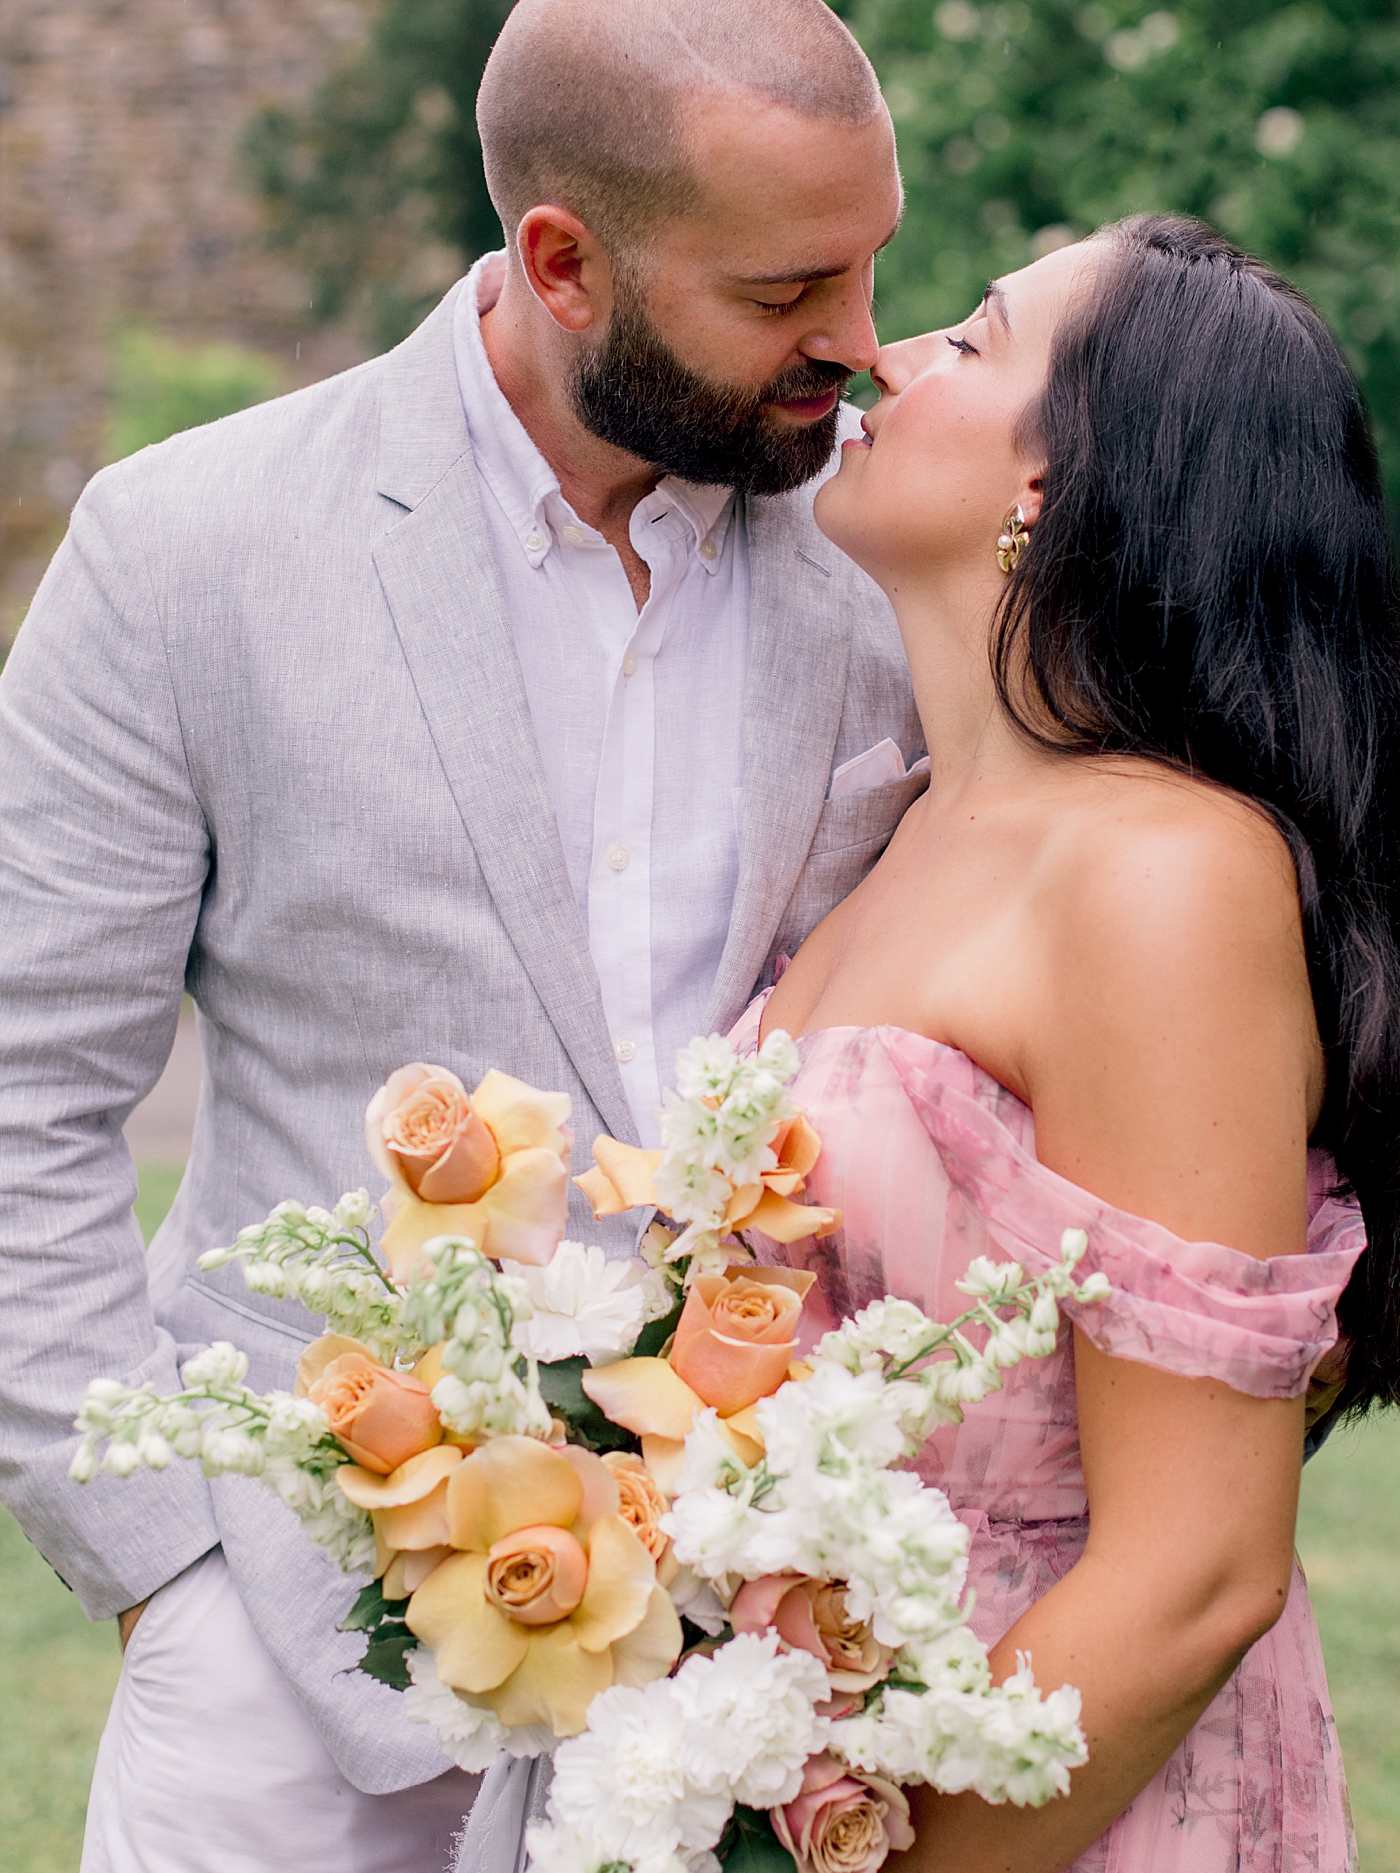 Bride and groom kissing holding a bouquet | Styling and Planning Engagement Sessions with Hope Helmuth Photography